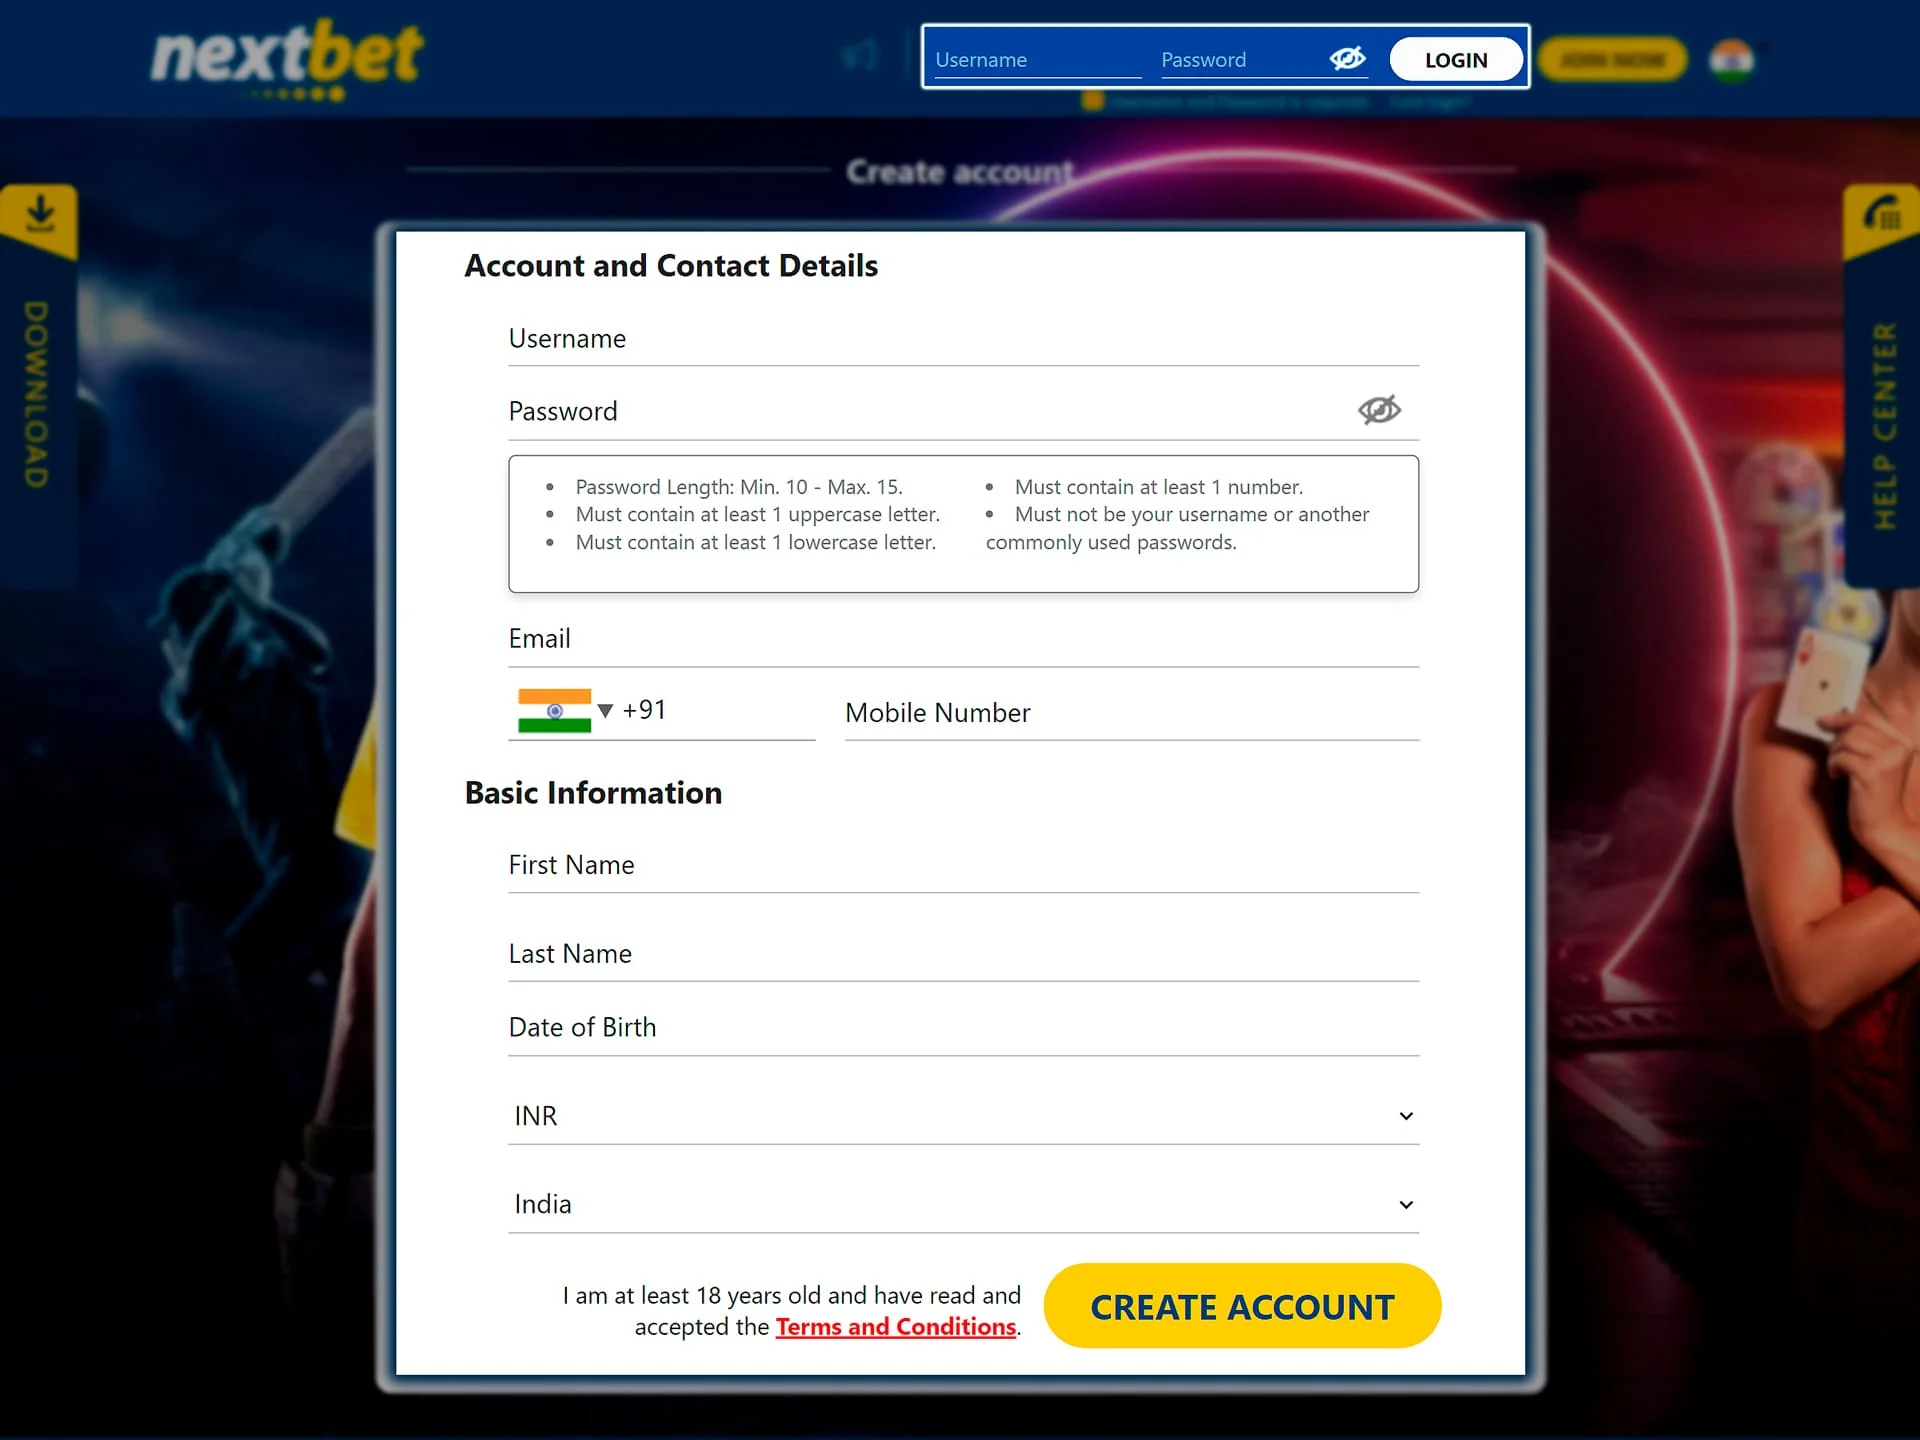 Go to the official Nextbet website and log in to your profile.